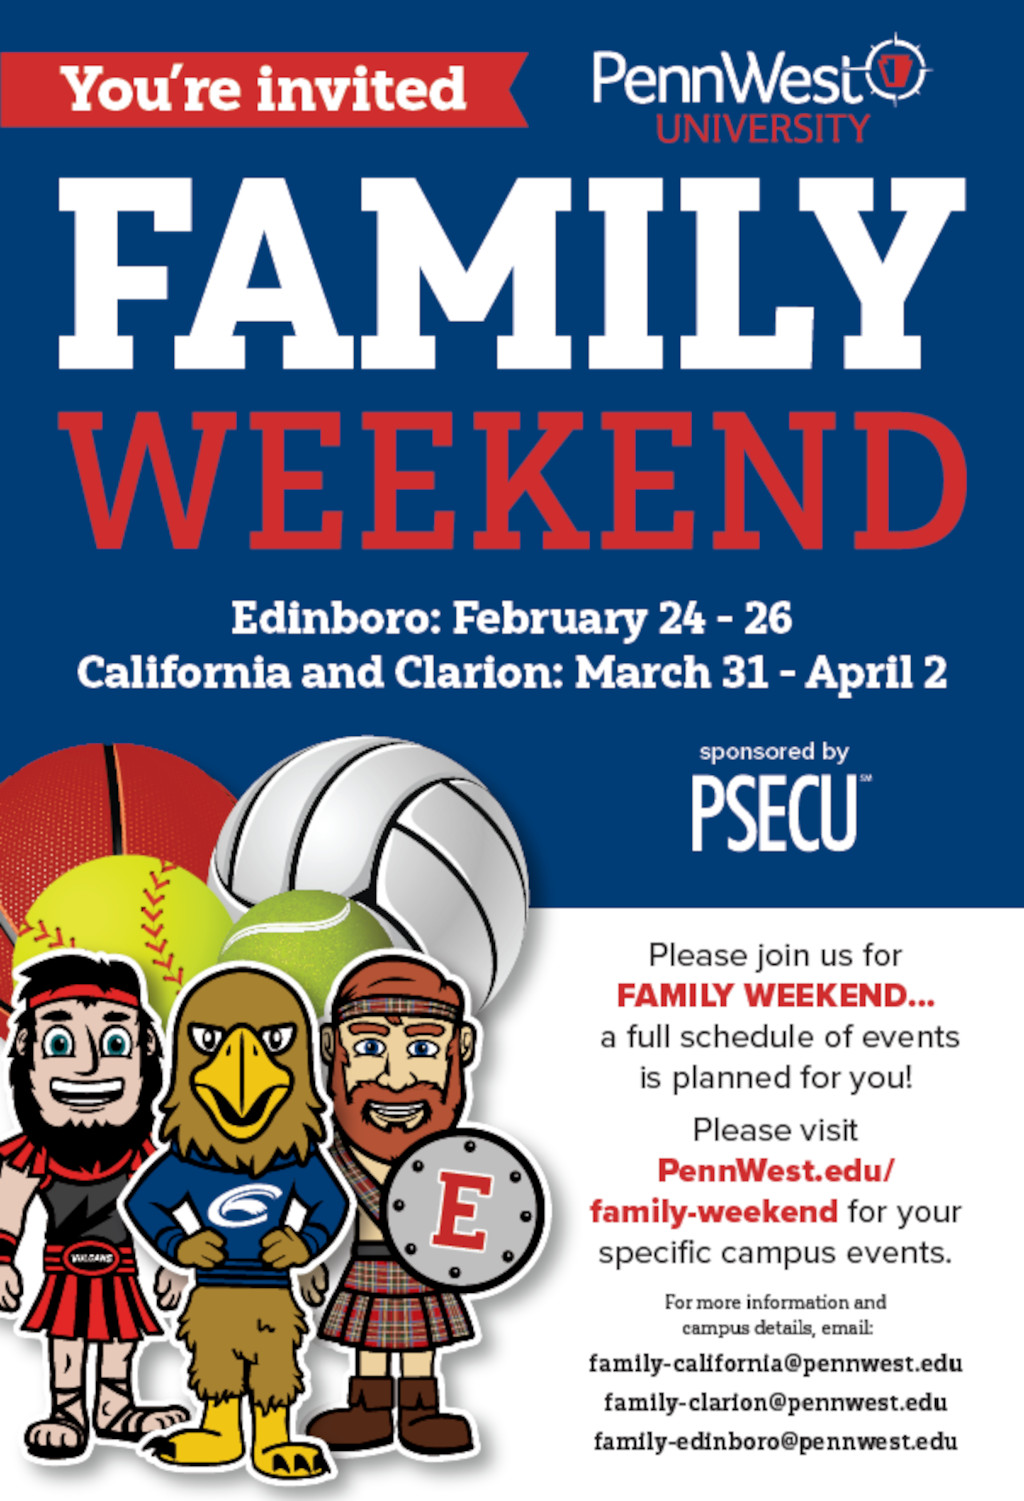 Family Weekend Information